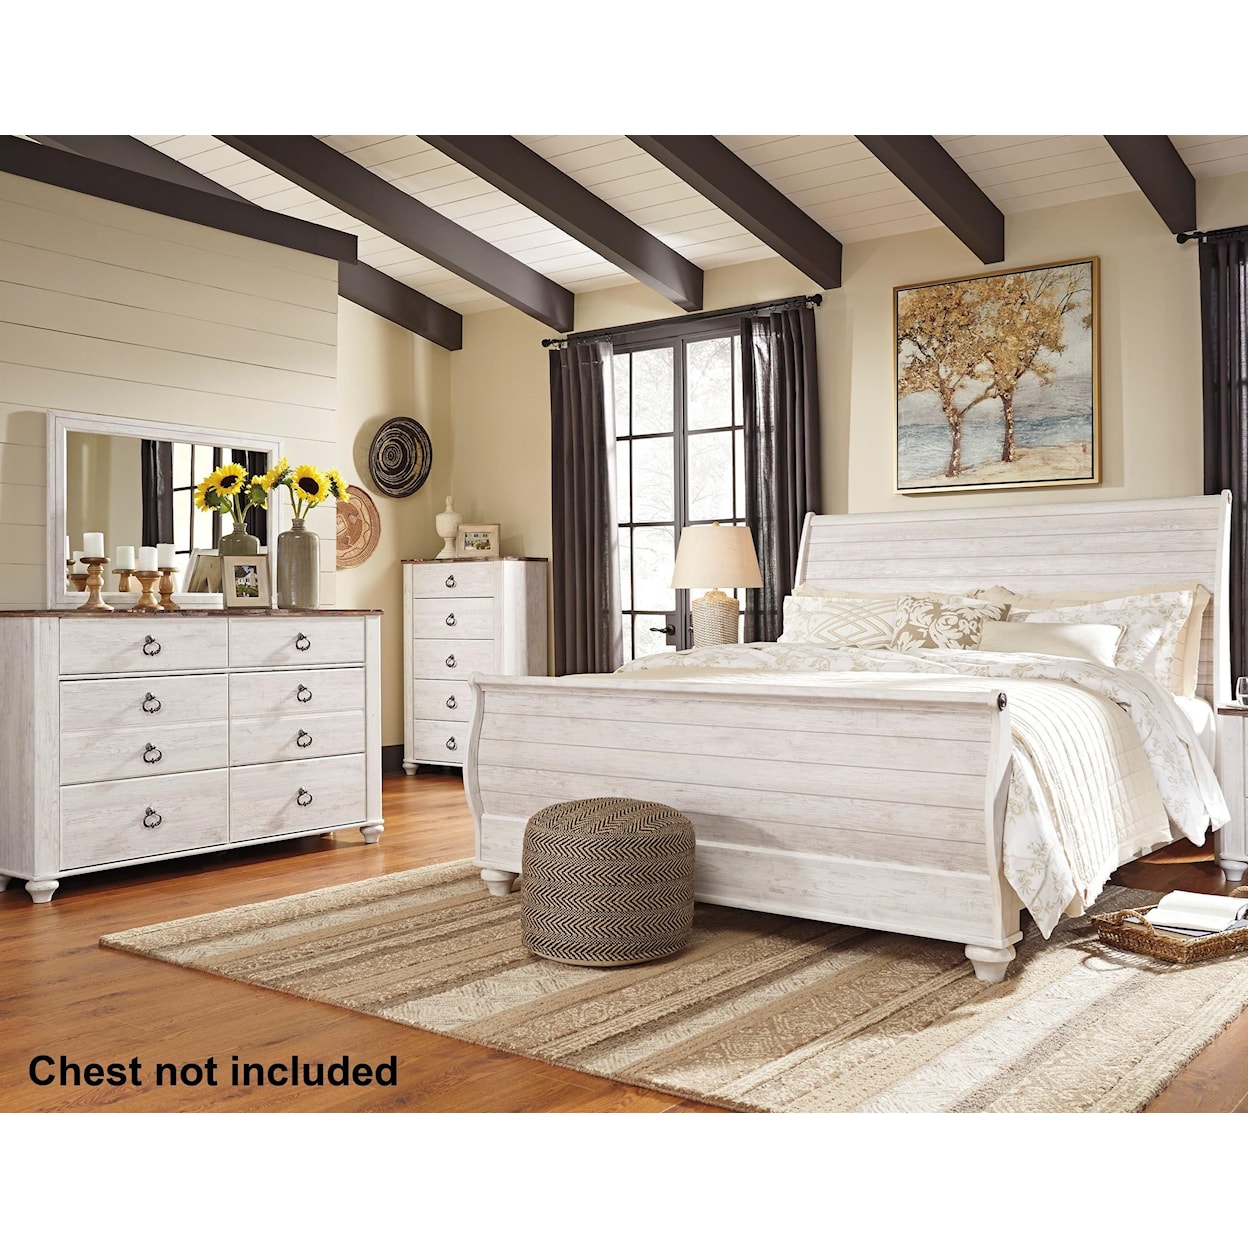 Signature Design Willowton King Bedroom Group